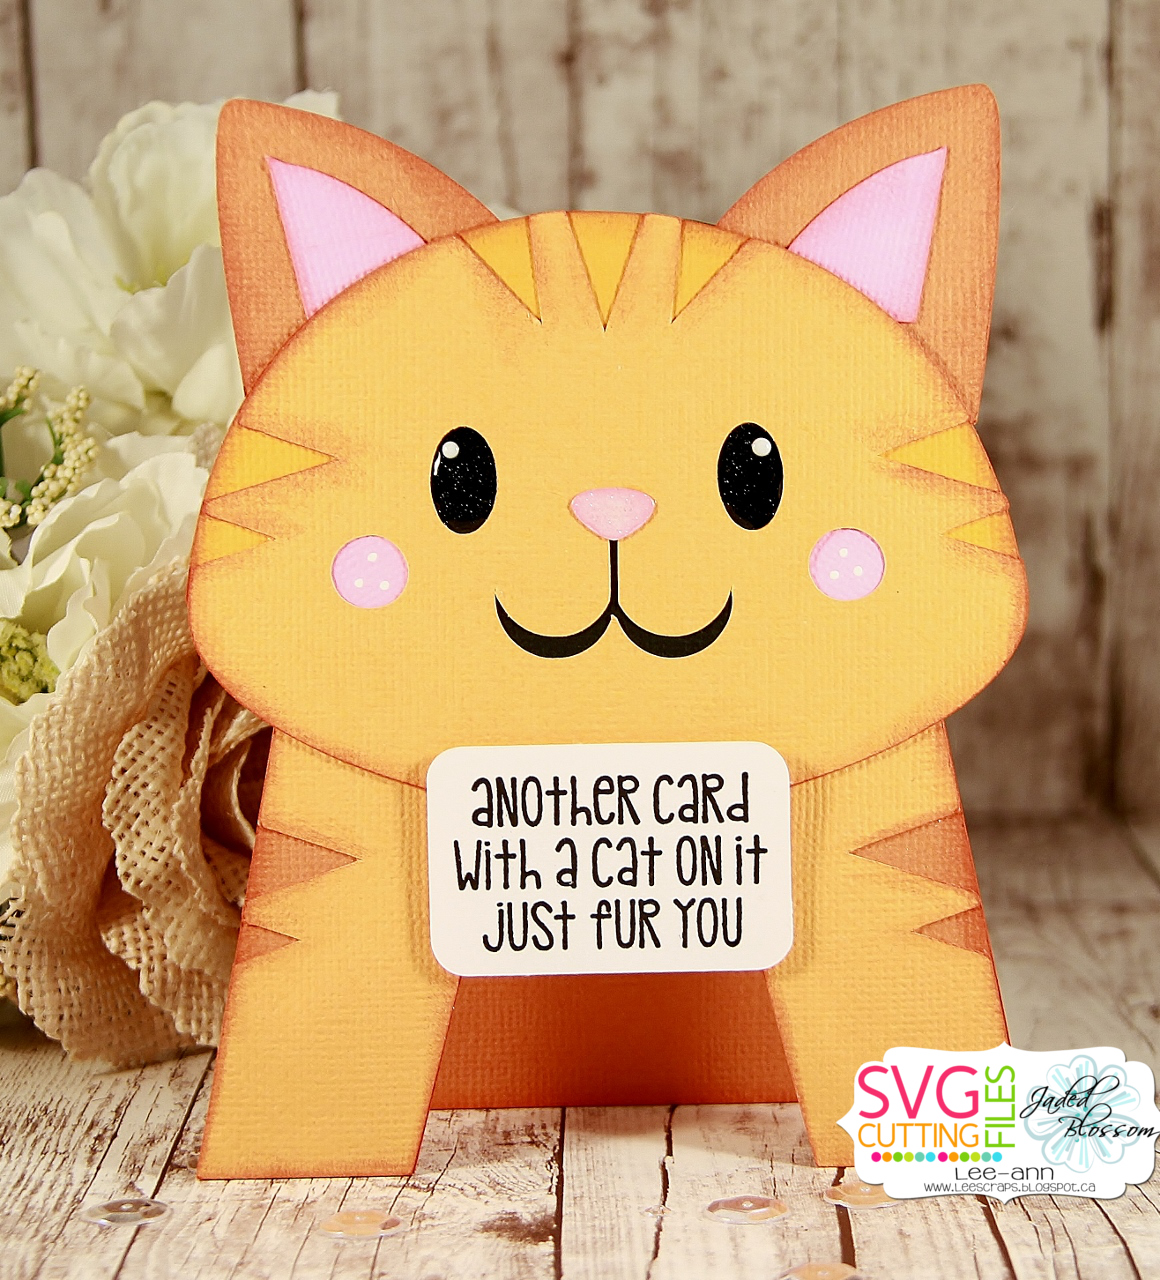 Snappy Scraps: Cat Card from SVG Cutting Files